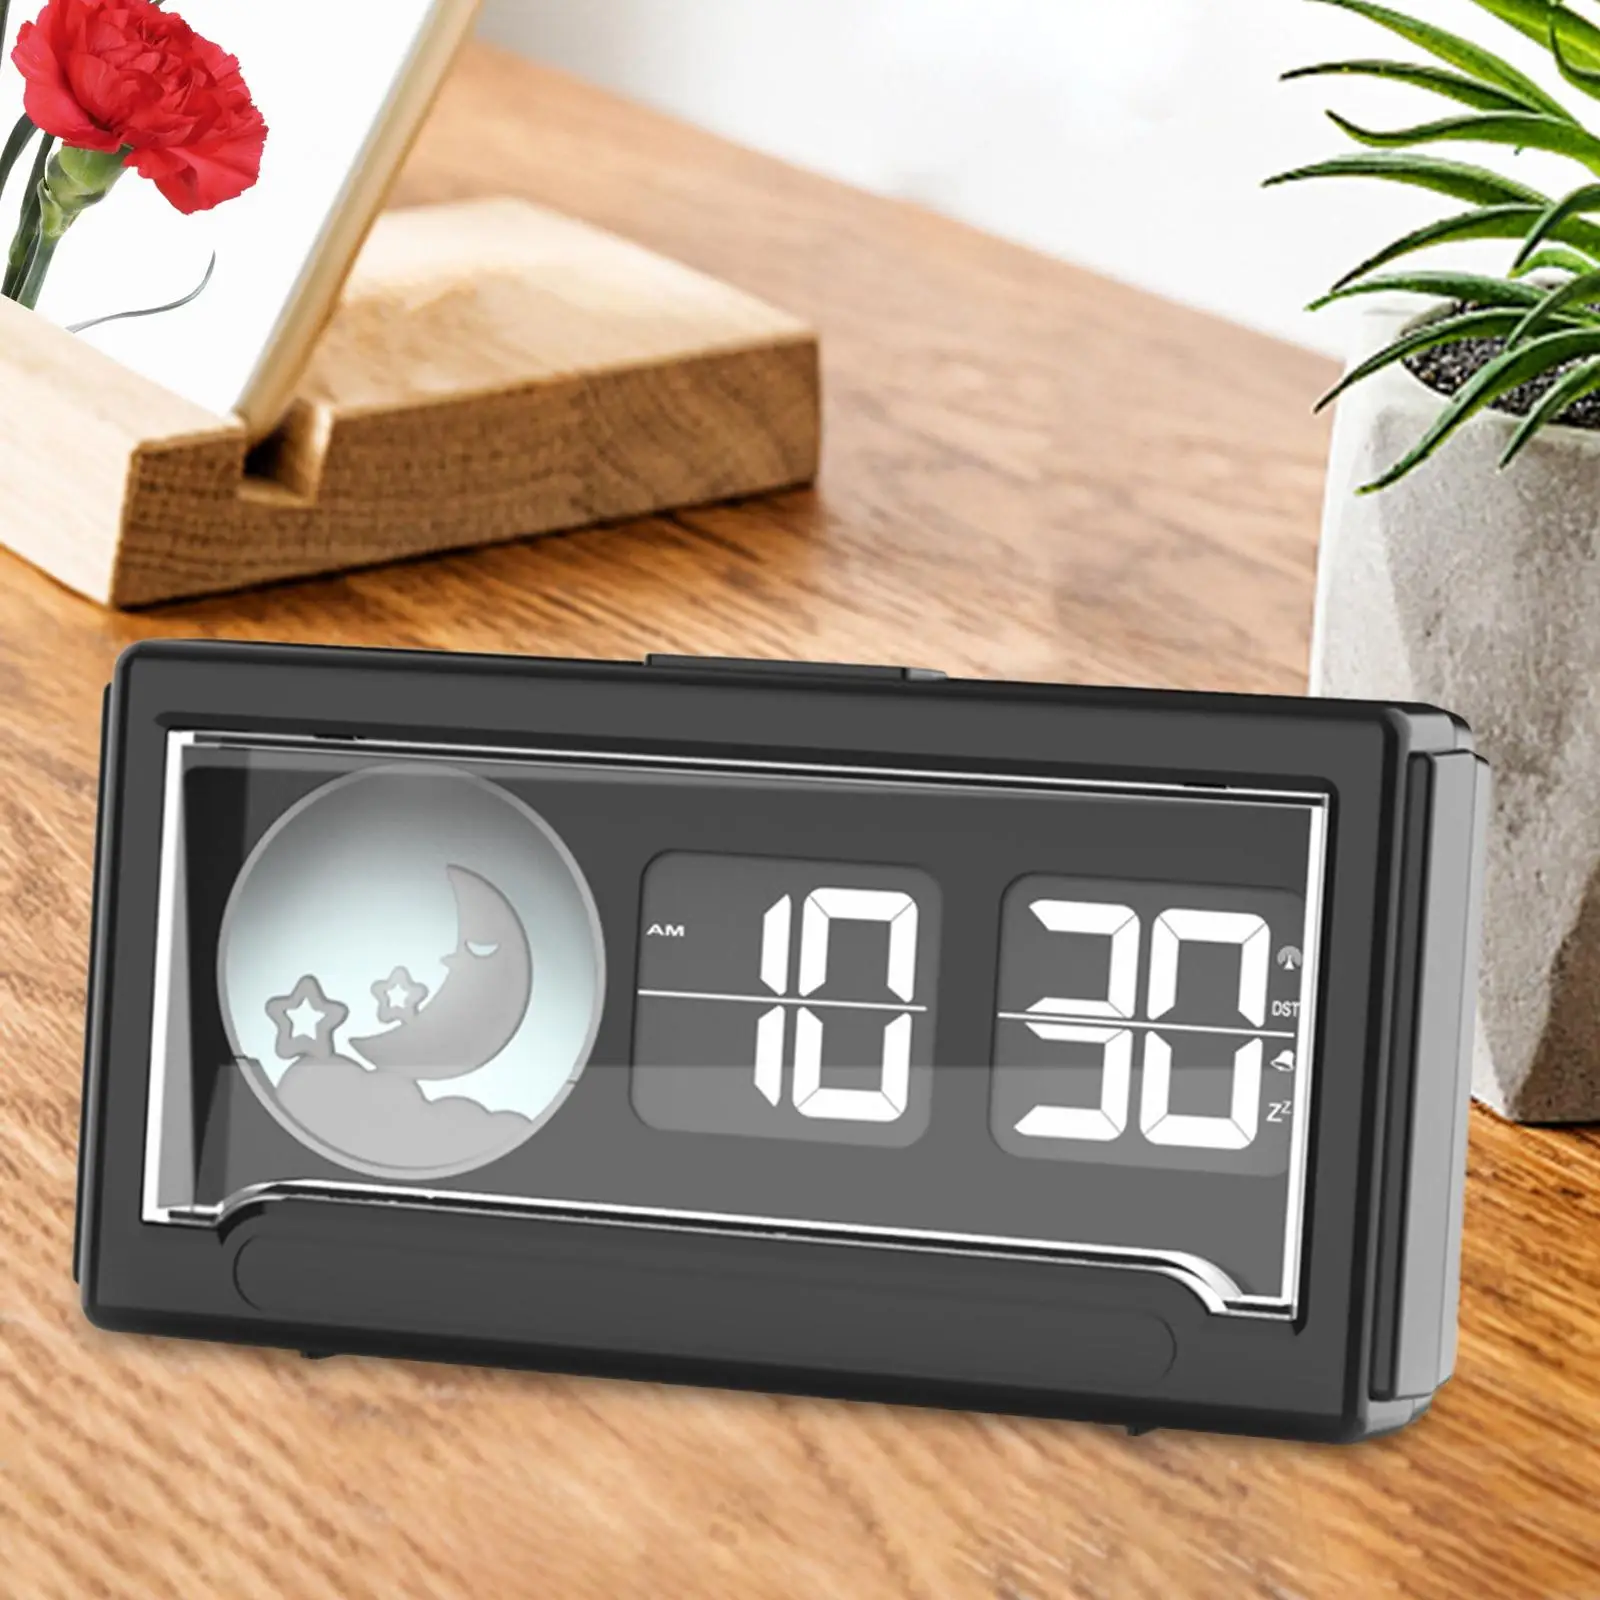 Auto Flip Clock 12 Hours Format Display Vintage Clock Flip Down Clock Retro Table Clock for Office Kitchen Home Decoration